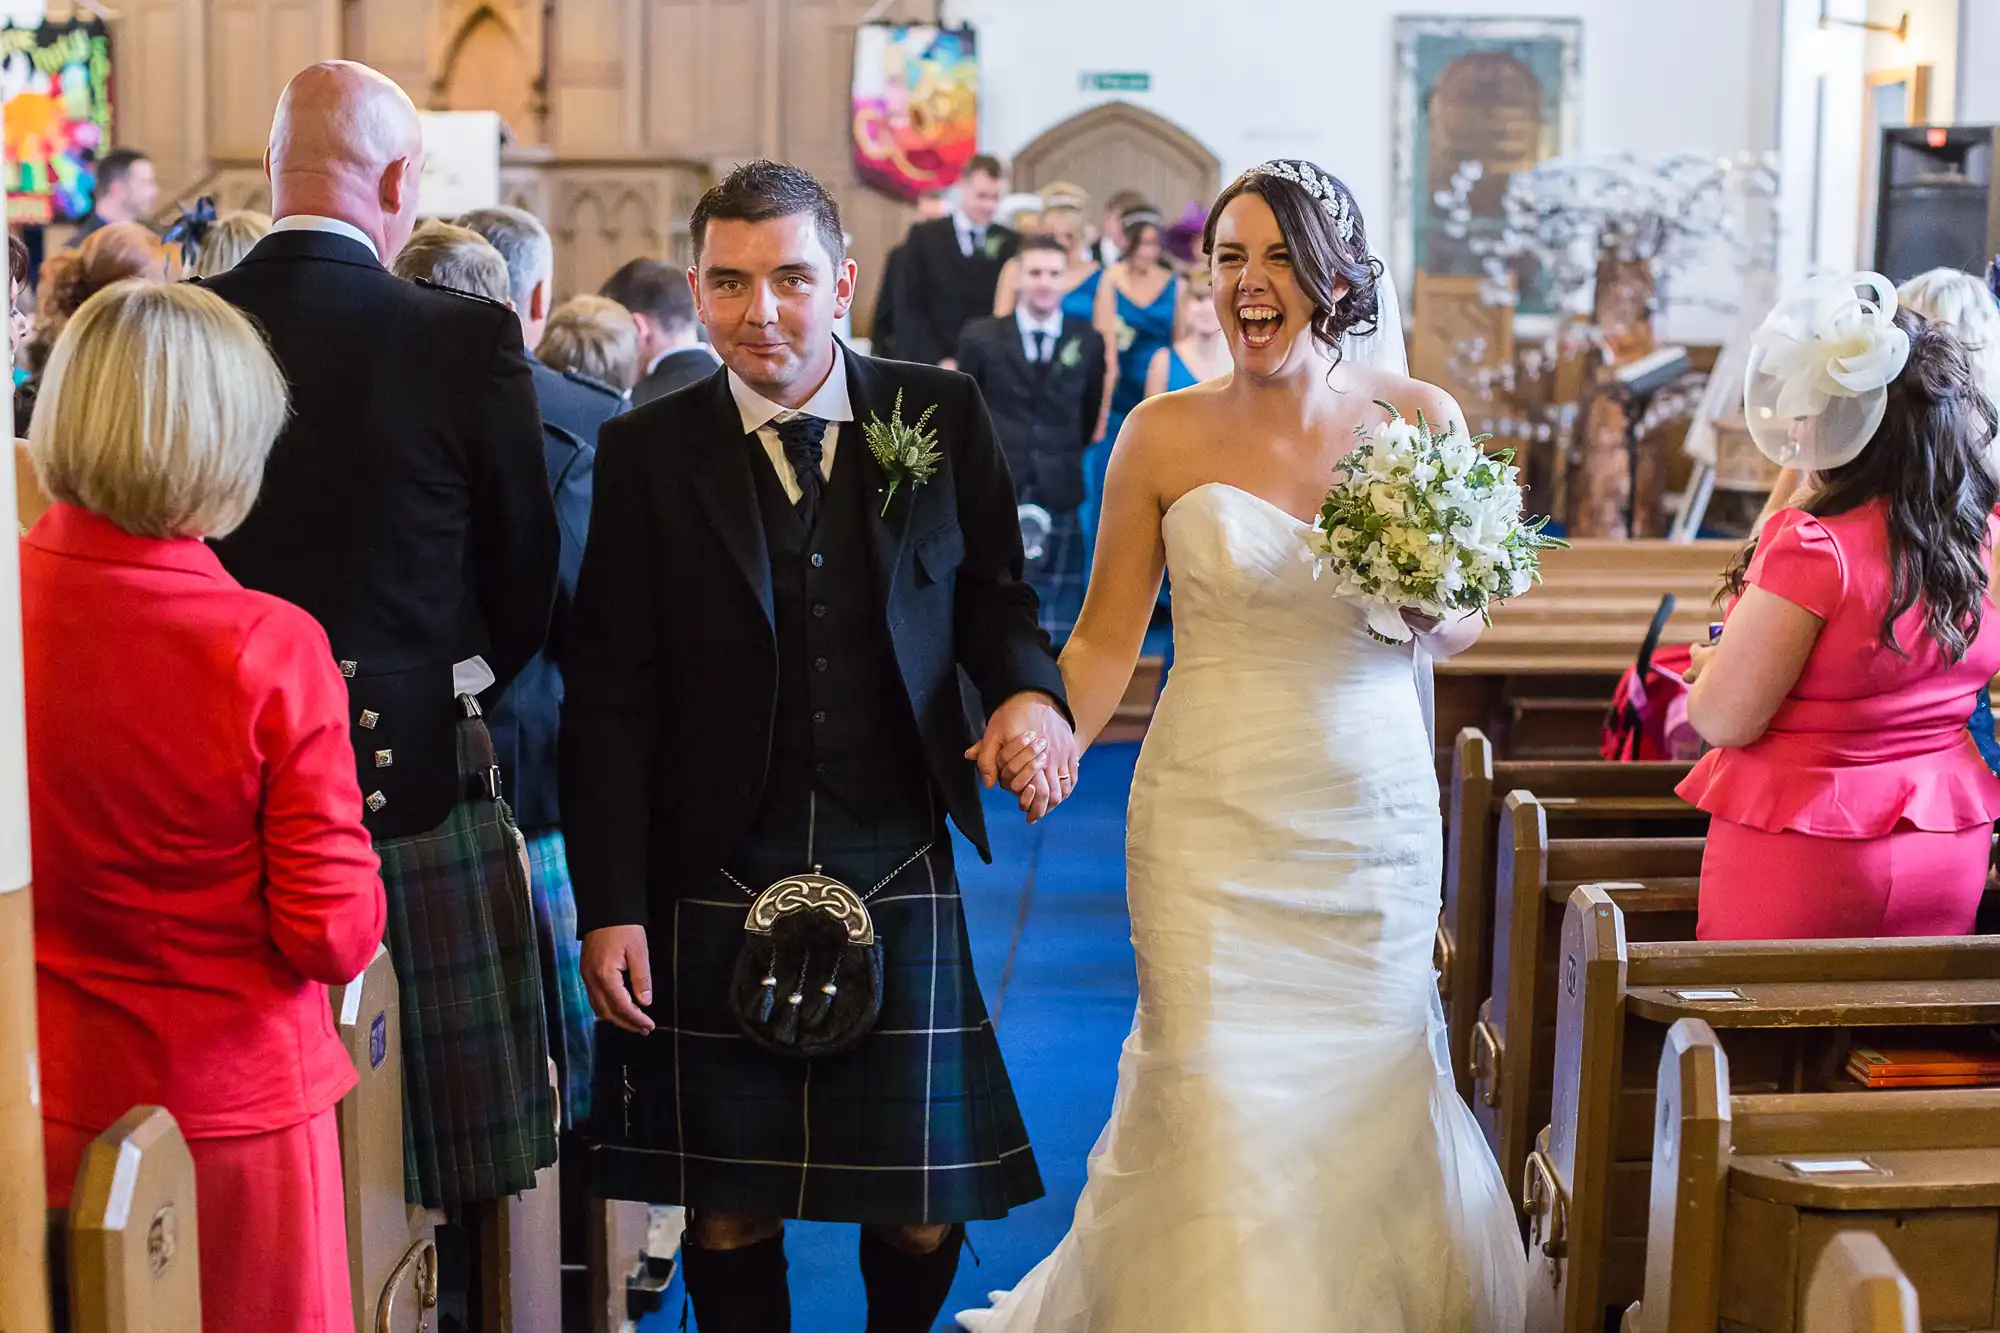 A bride and groom holding hands walk down the aisle, smiling, surrounded by guests in a church. the groom wears a kilt, and the bride is in a white gown.